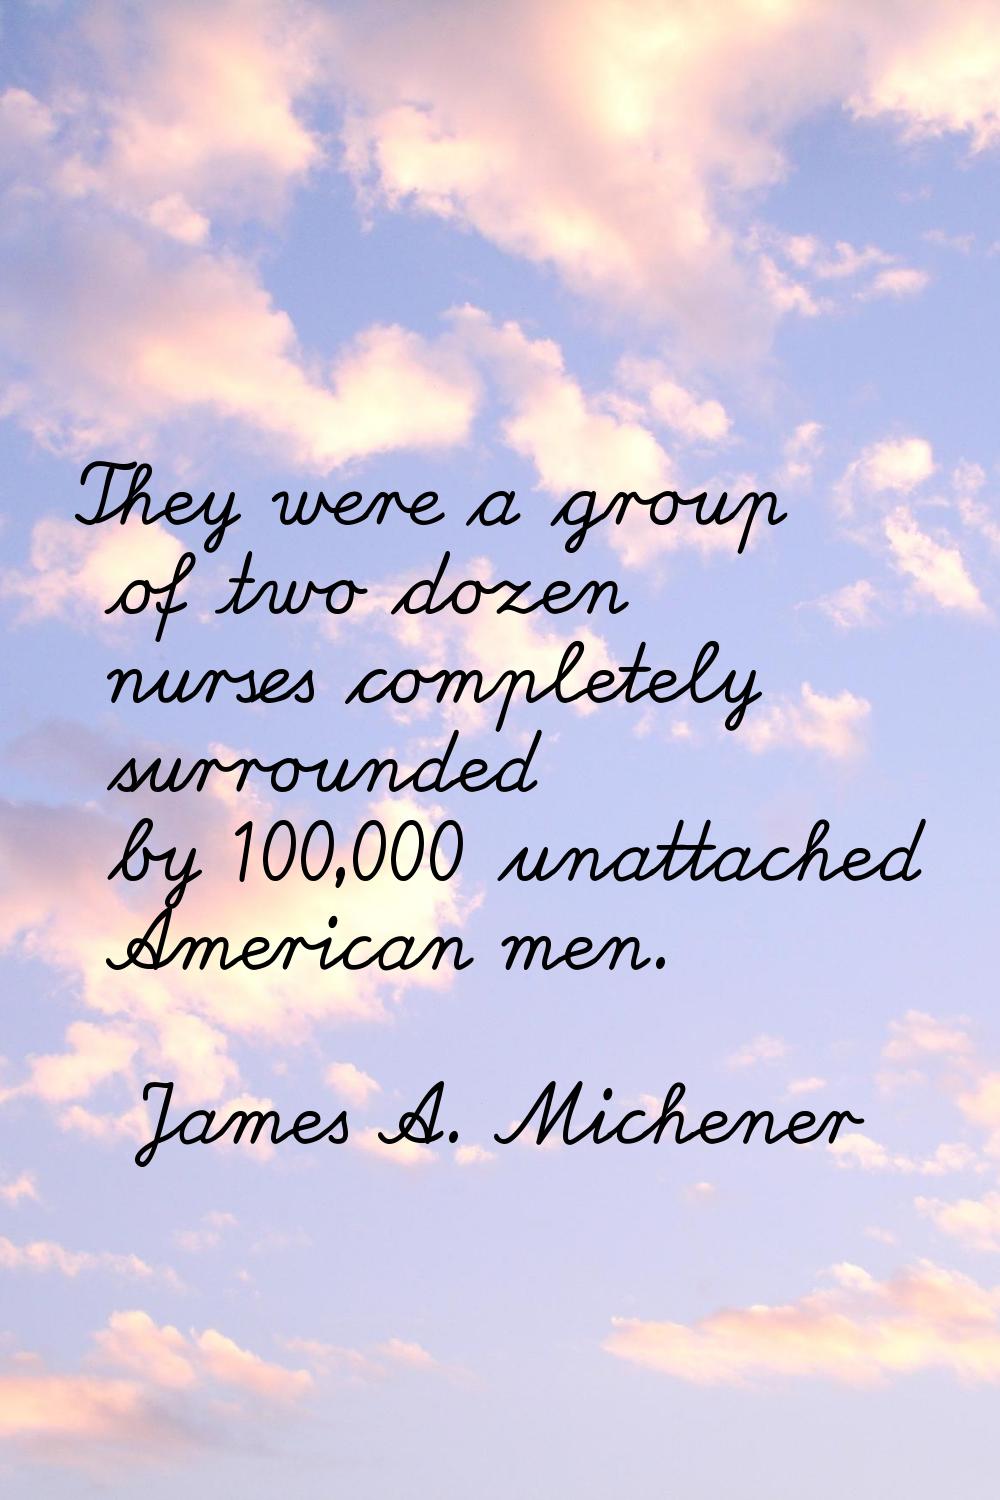 They were a group of two dozen nurses completely surrounded by 100,000 unattached American men.